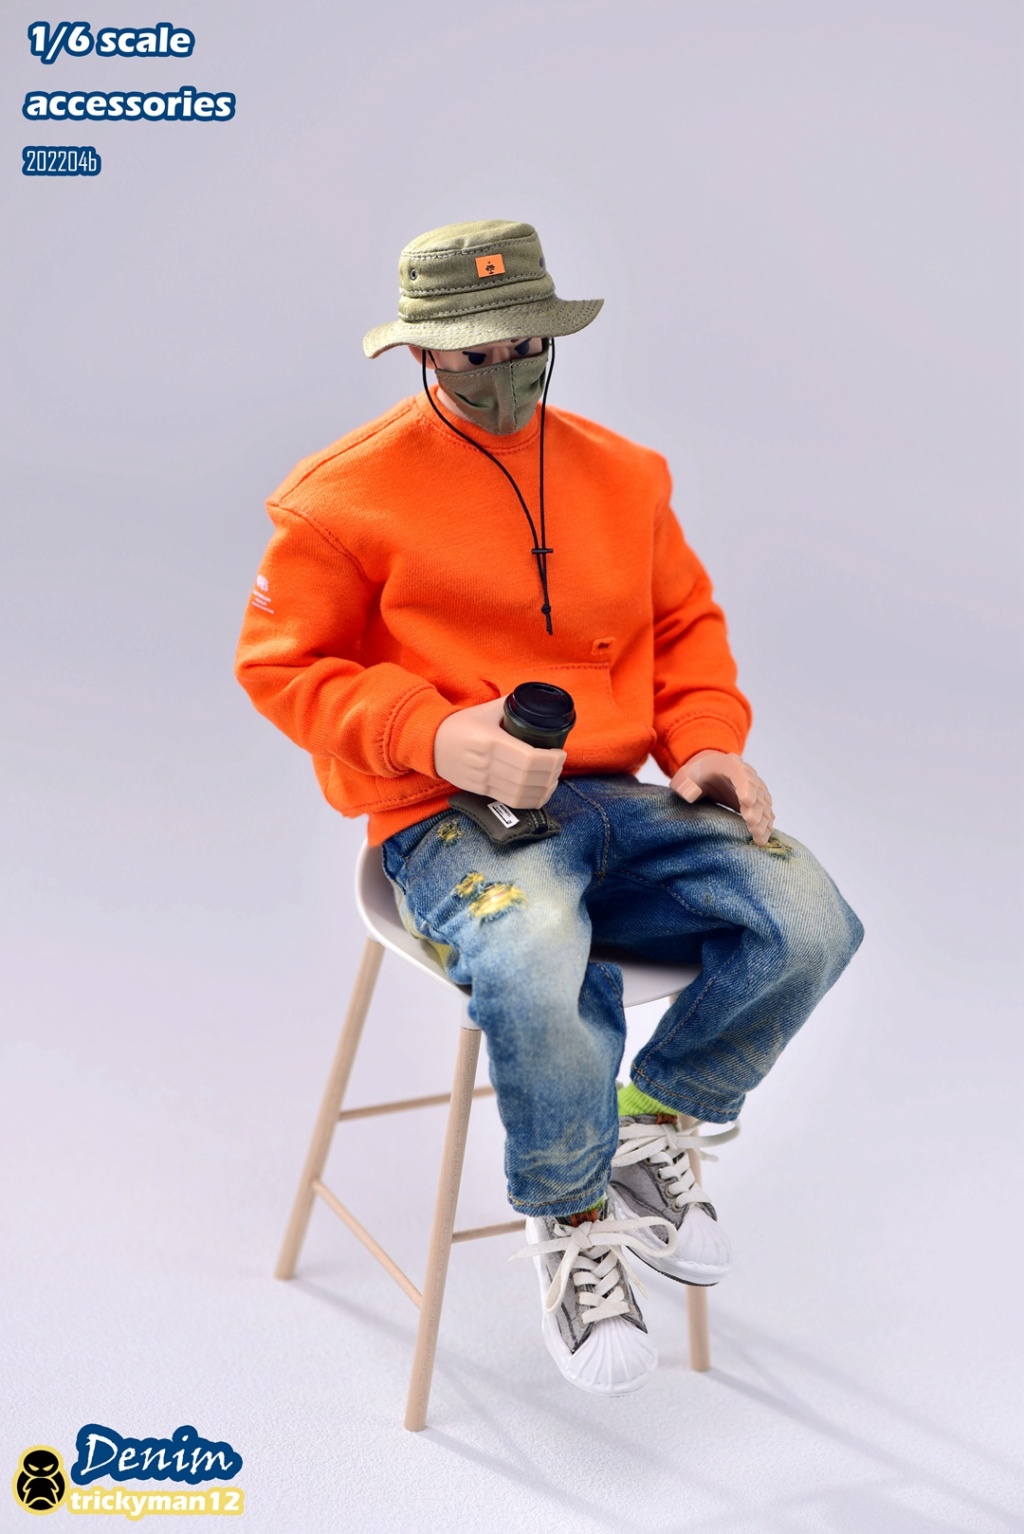 accessory - NEW PRODUCT: Trickyman12: 1/6 Denim Clothing Set [A/B Style] 17553212